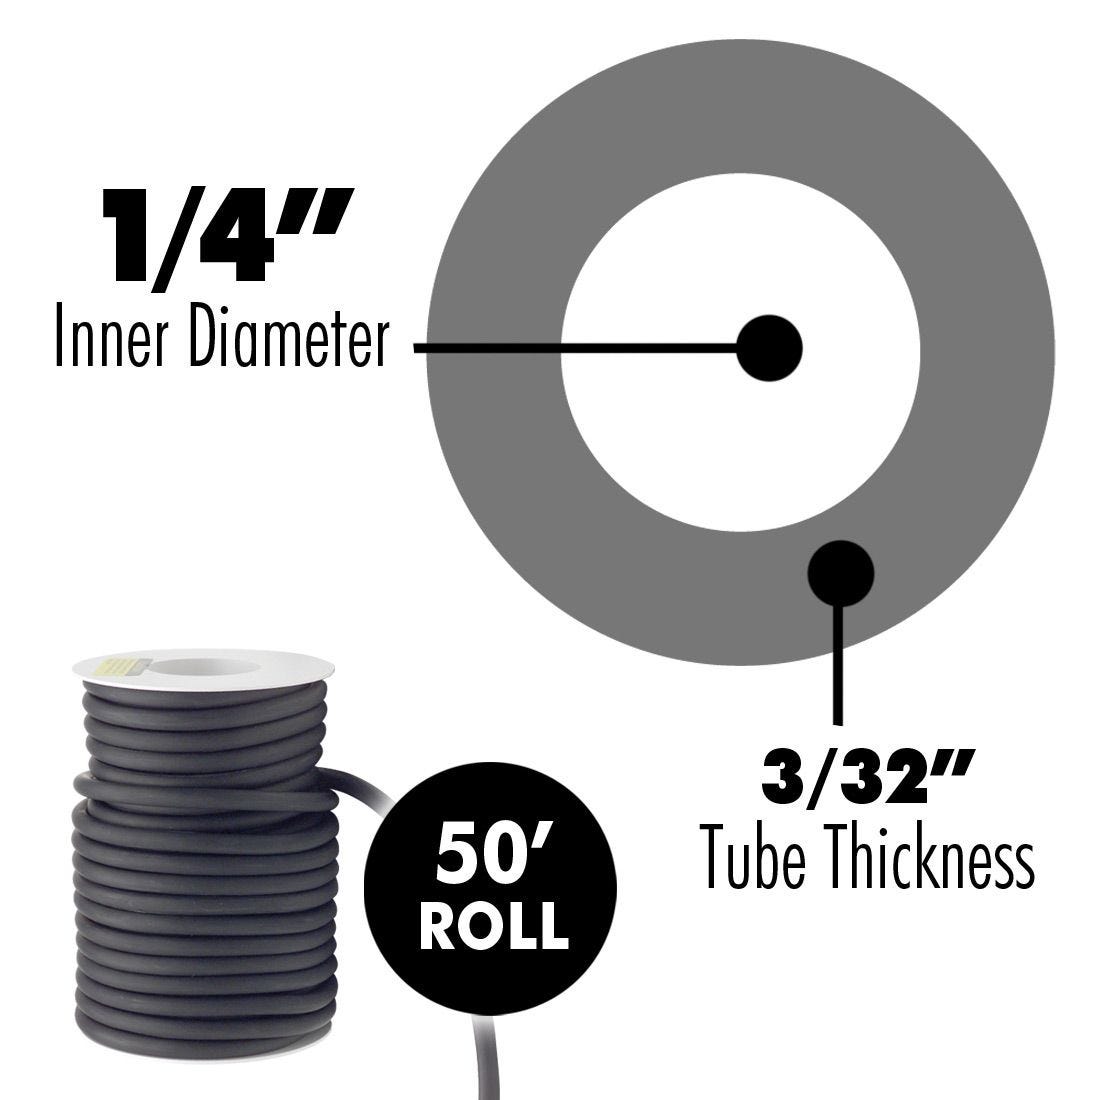 ACE Latex Rubber Tubing Black, 1/4" x 3/32"- 50' Roll